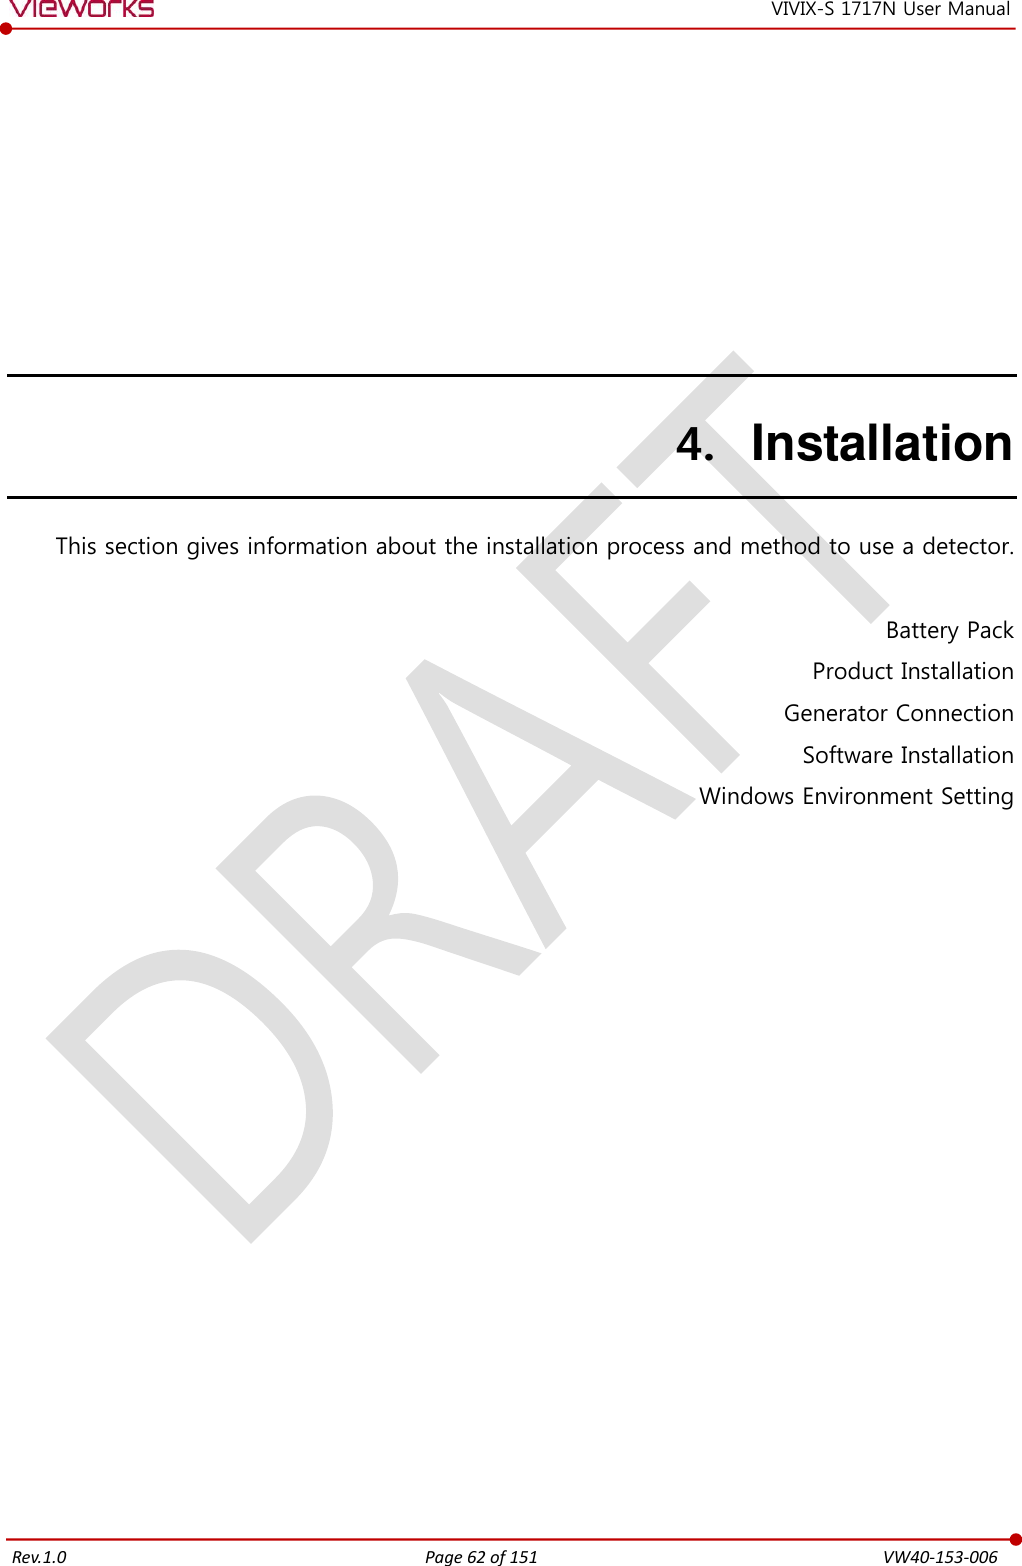   Rev.1.0 Page 62 of 151  VW40-153-006 VIVIX-S 1717N User Manual 4. Installation This section gives information about the installation process and method to use a detector.  Battery Pack Product Installation Generator Connection Software Installation Windows Environment Setting         